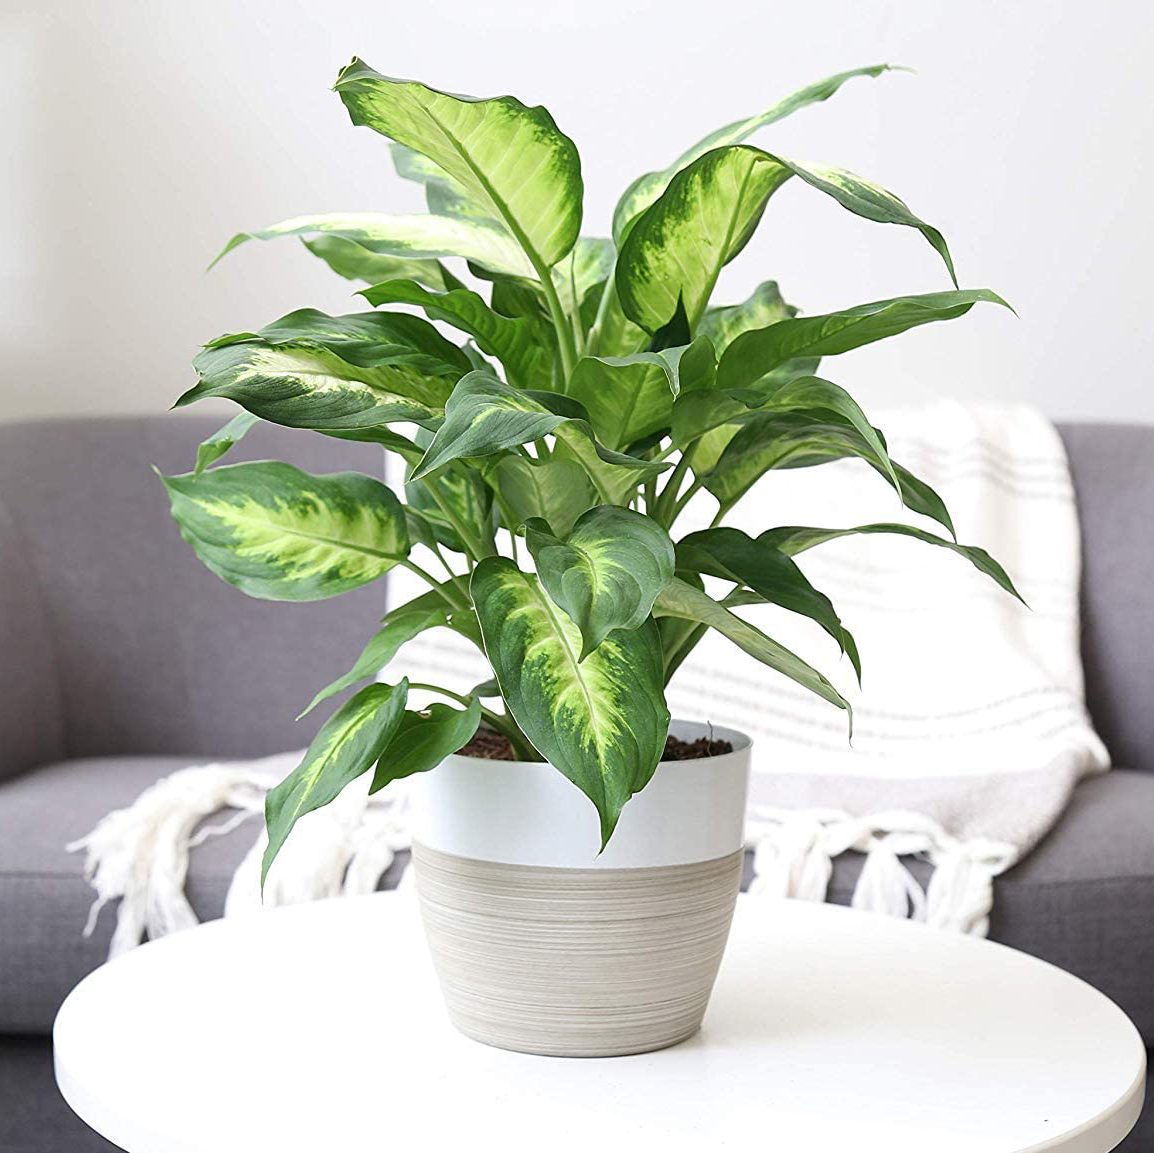 Hanging Plants Indoor | 5 Draping Indoor Plants for Low Light: Beautify Your Space with Minimal Effort